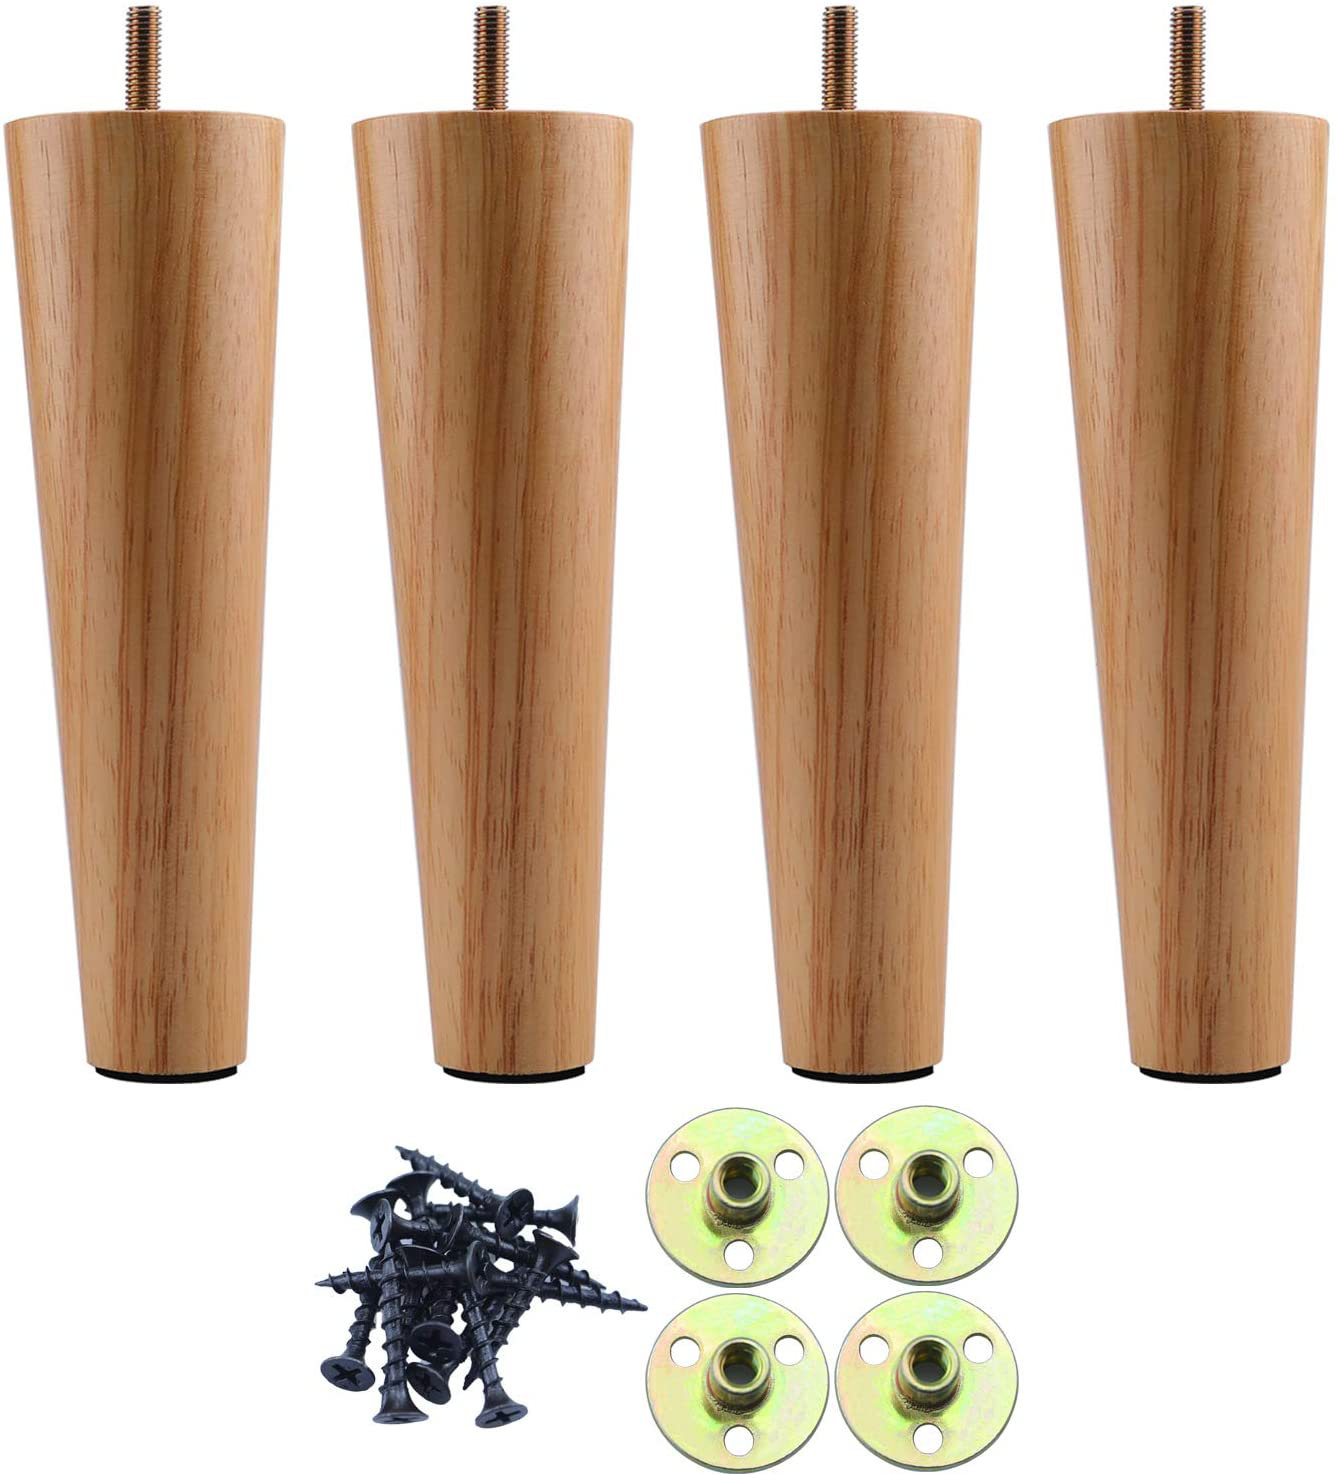 4pcs Solid Wooden Furniture Feet Leg Stand for Sofa Couch Bed Chair 